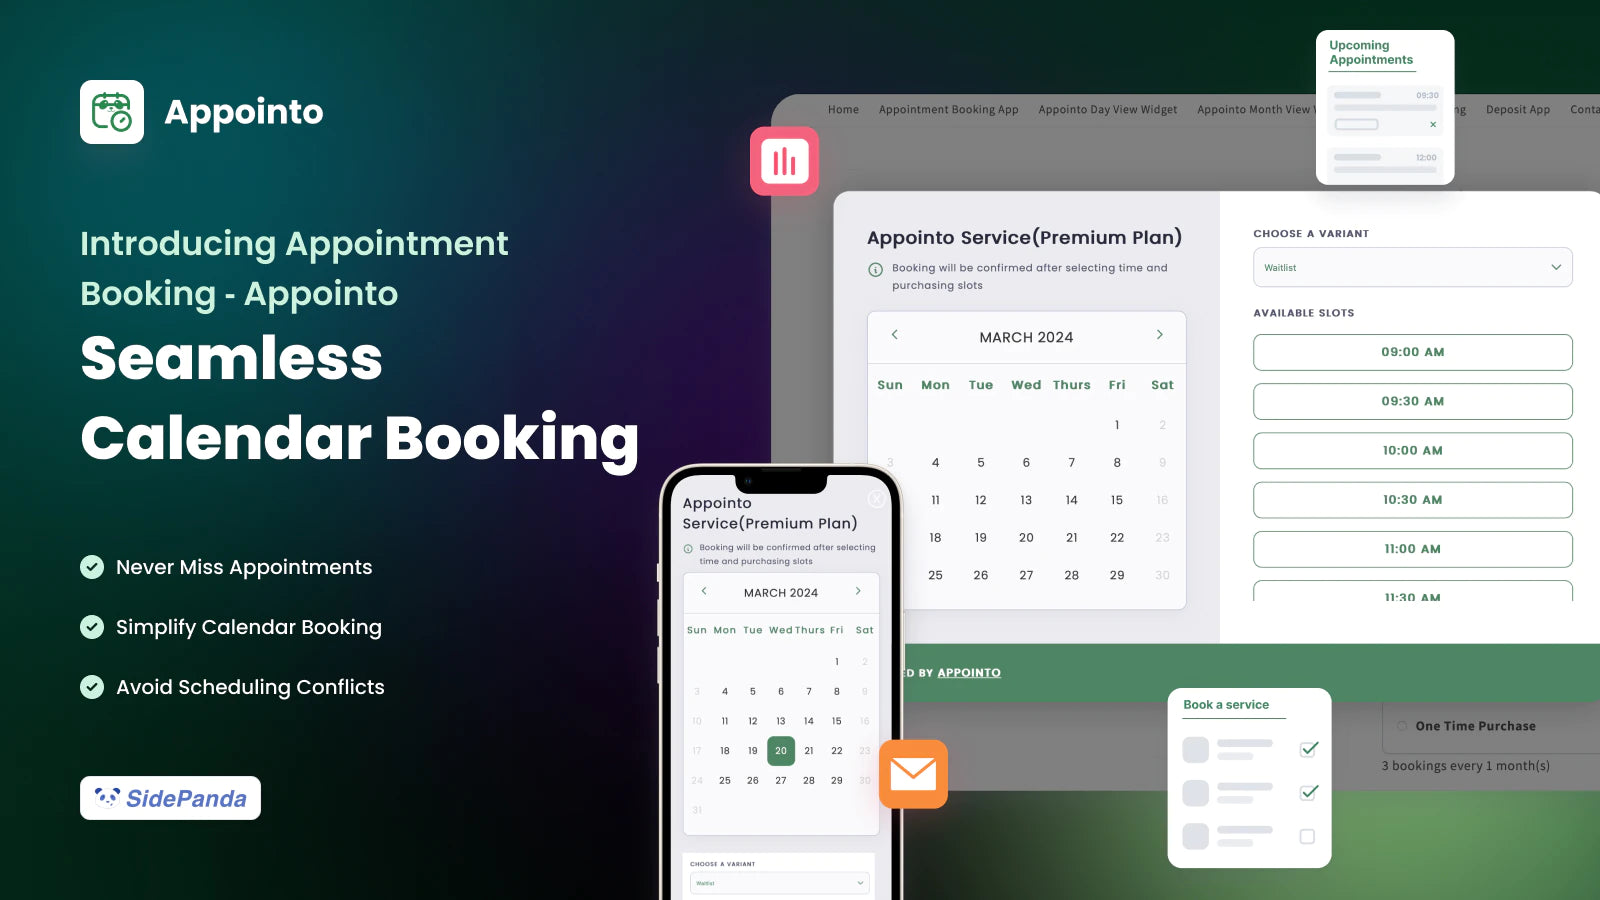 appointo app showing the calendar booking options